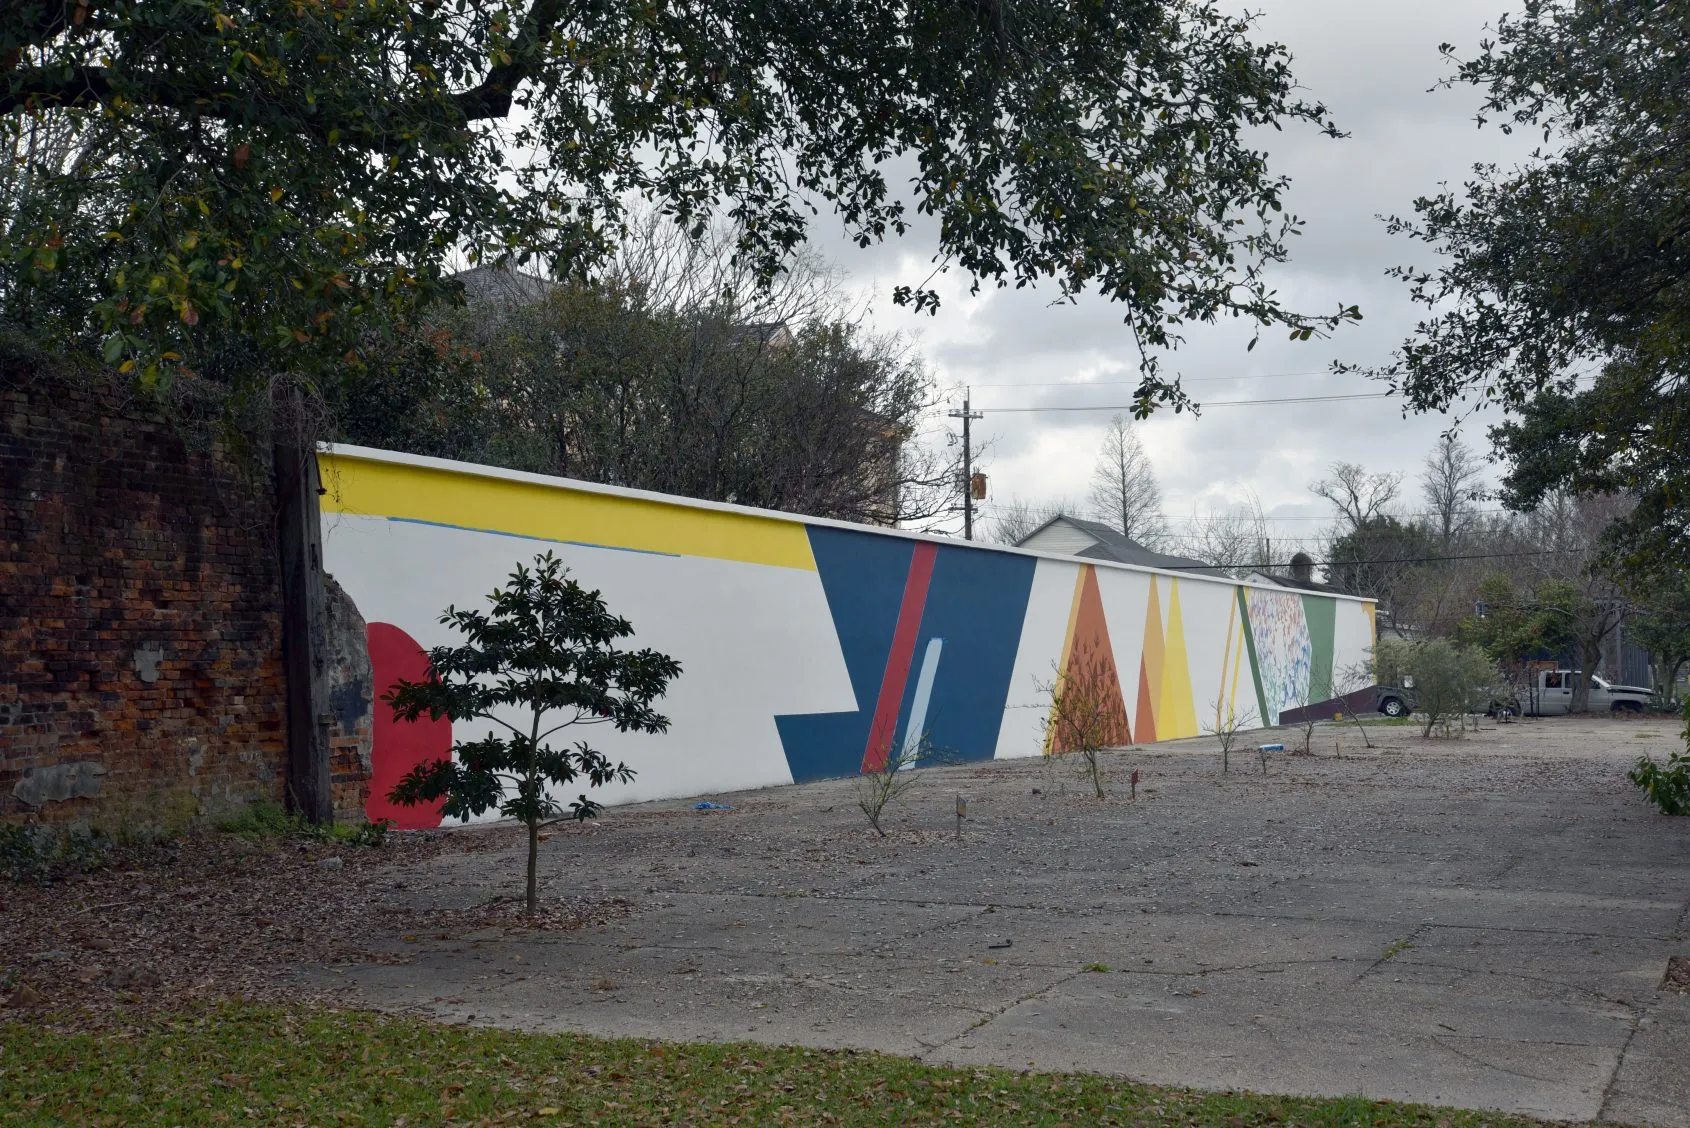 Plessy-Mural-Creation-2-21-18-cc_2069.png